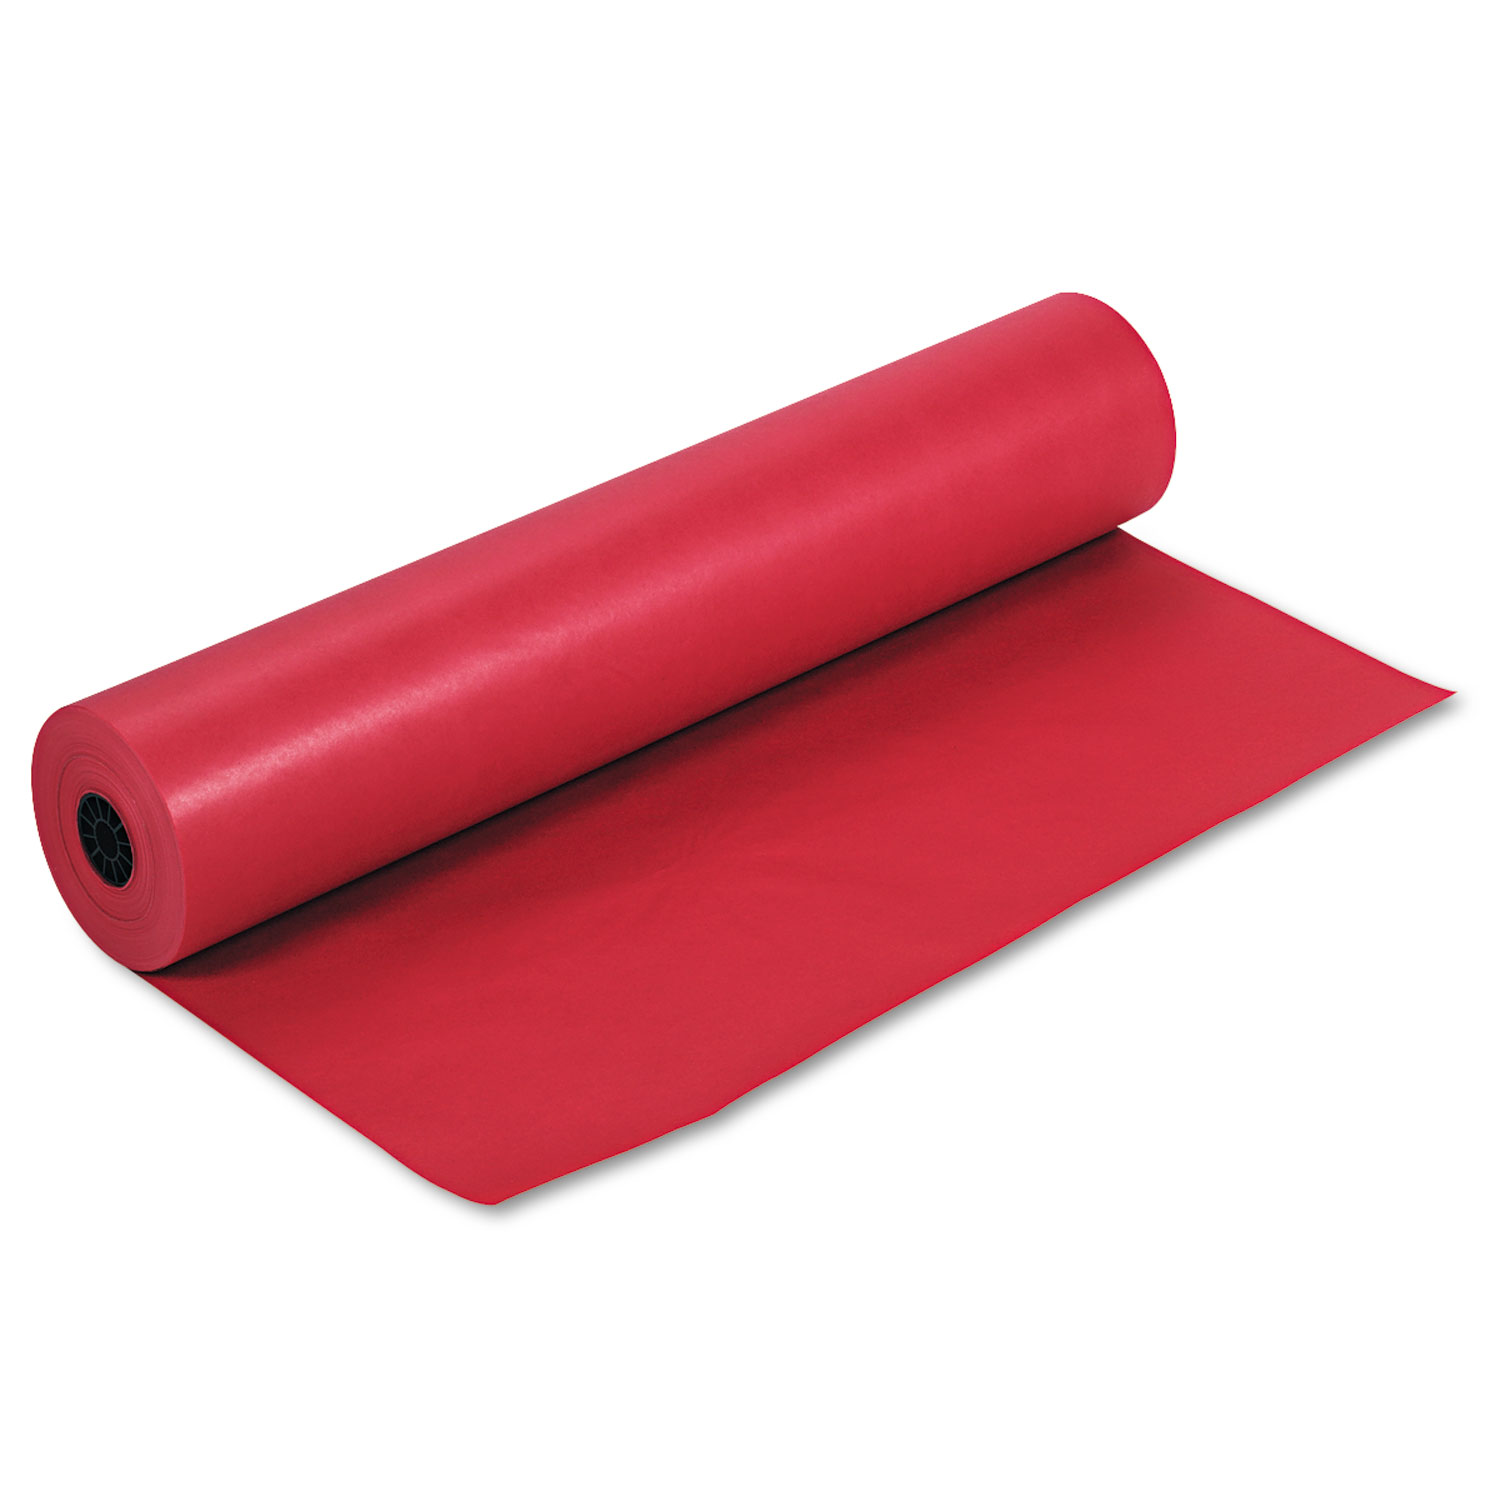  Pacon 63030 Rainbow Duo-Finish Colored Kraft Paper, 35lb, 36 x 1000ft, Scarlet (PAC63030) 